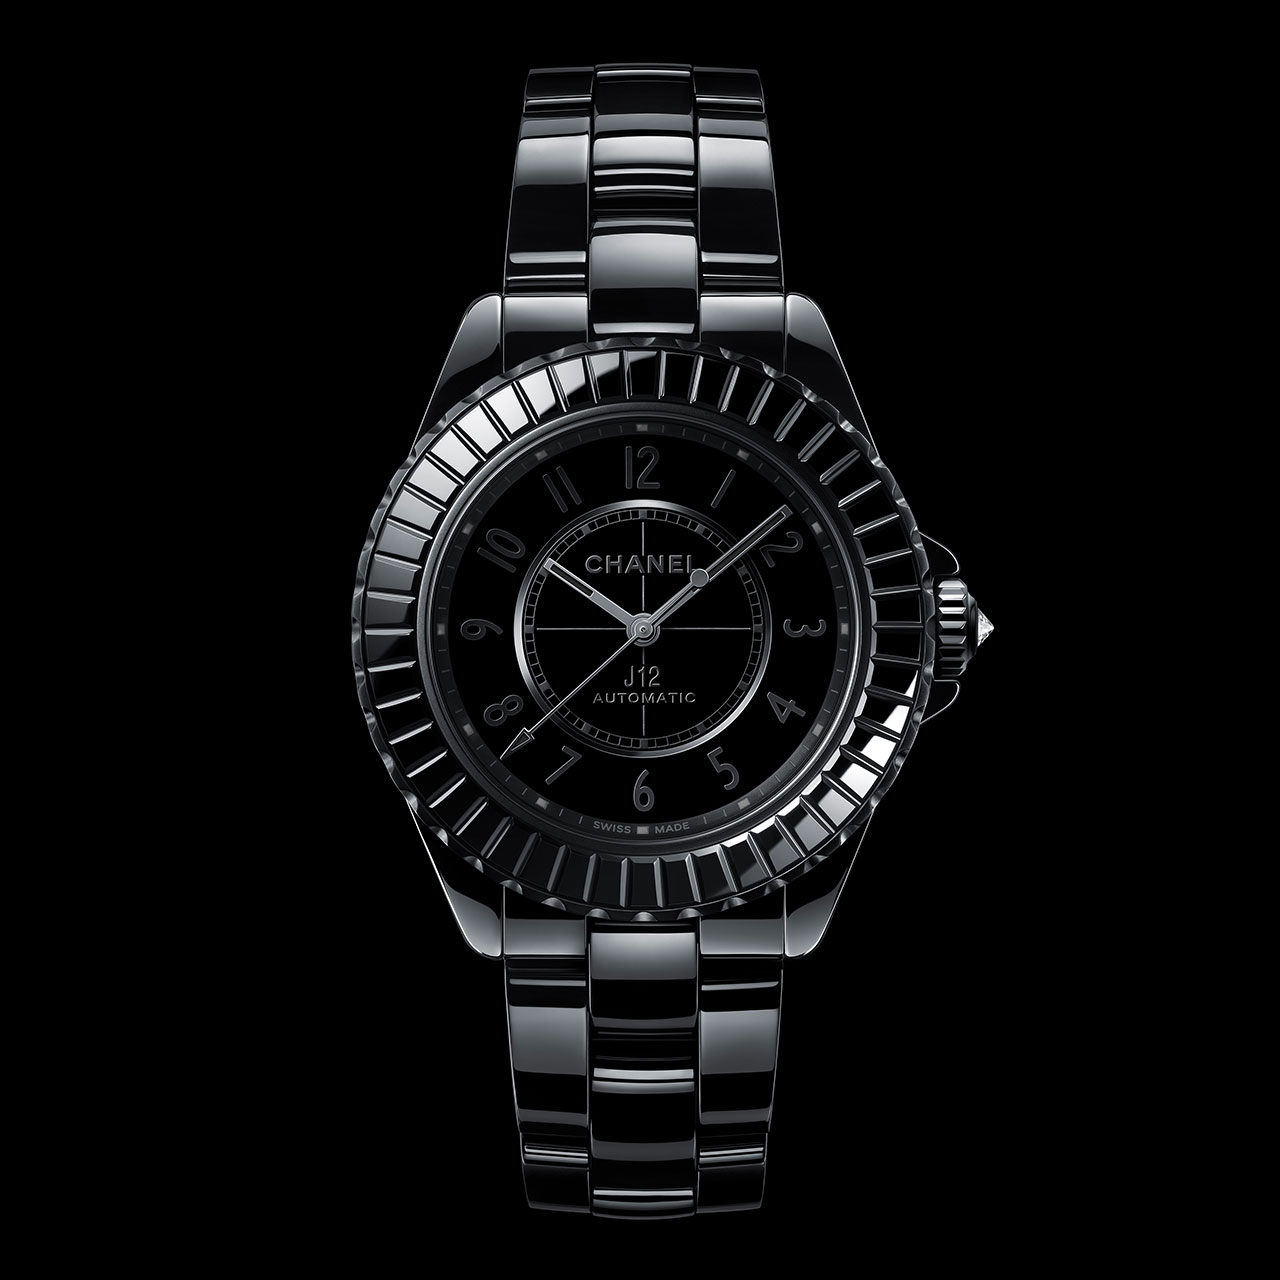 Chanel - J12 Watch, Time and Watches